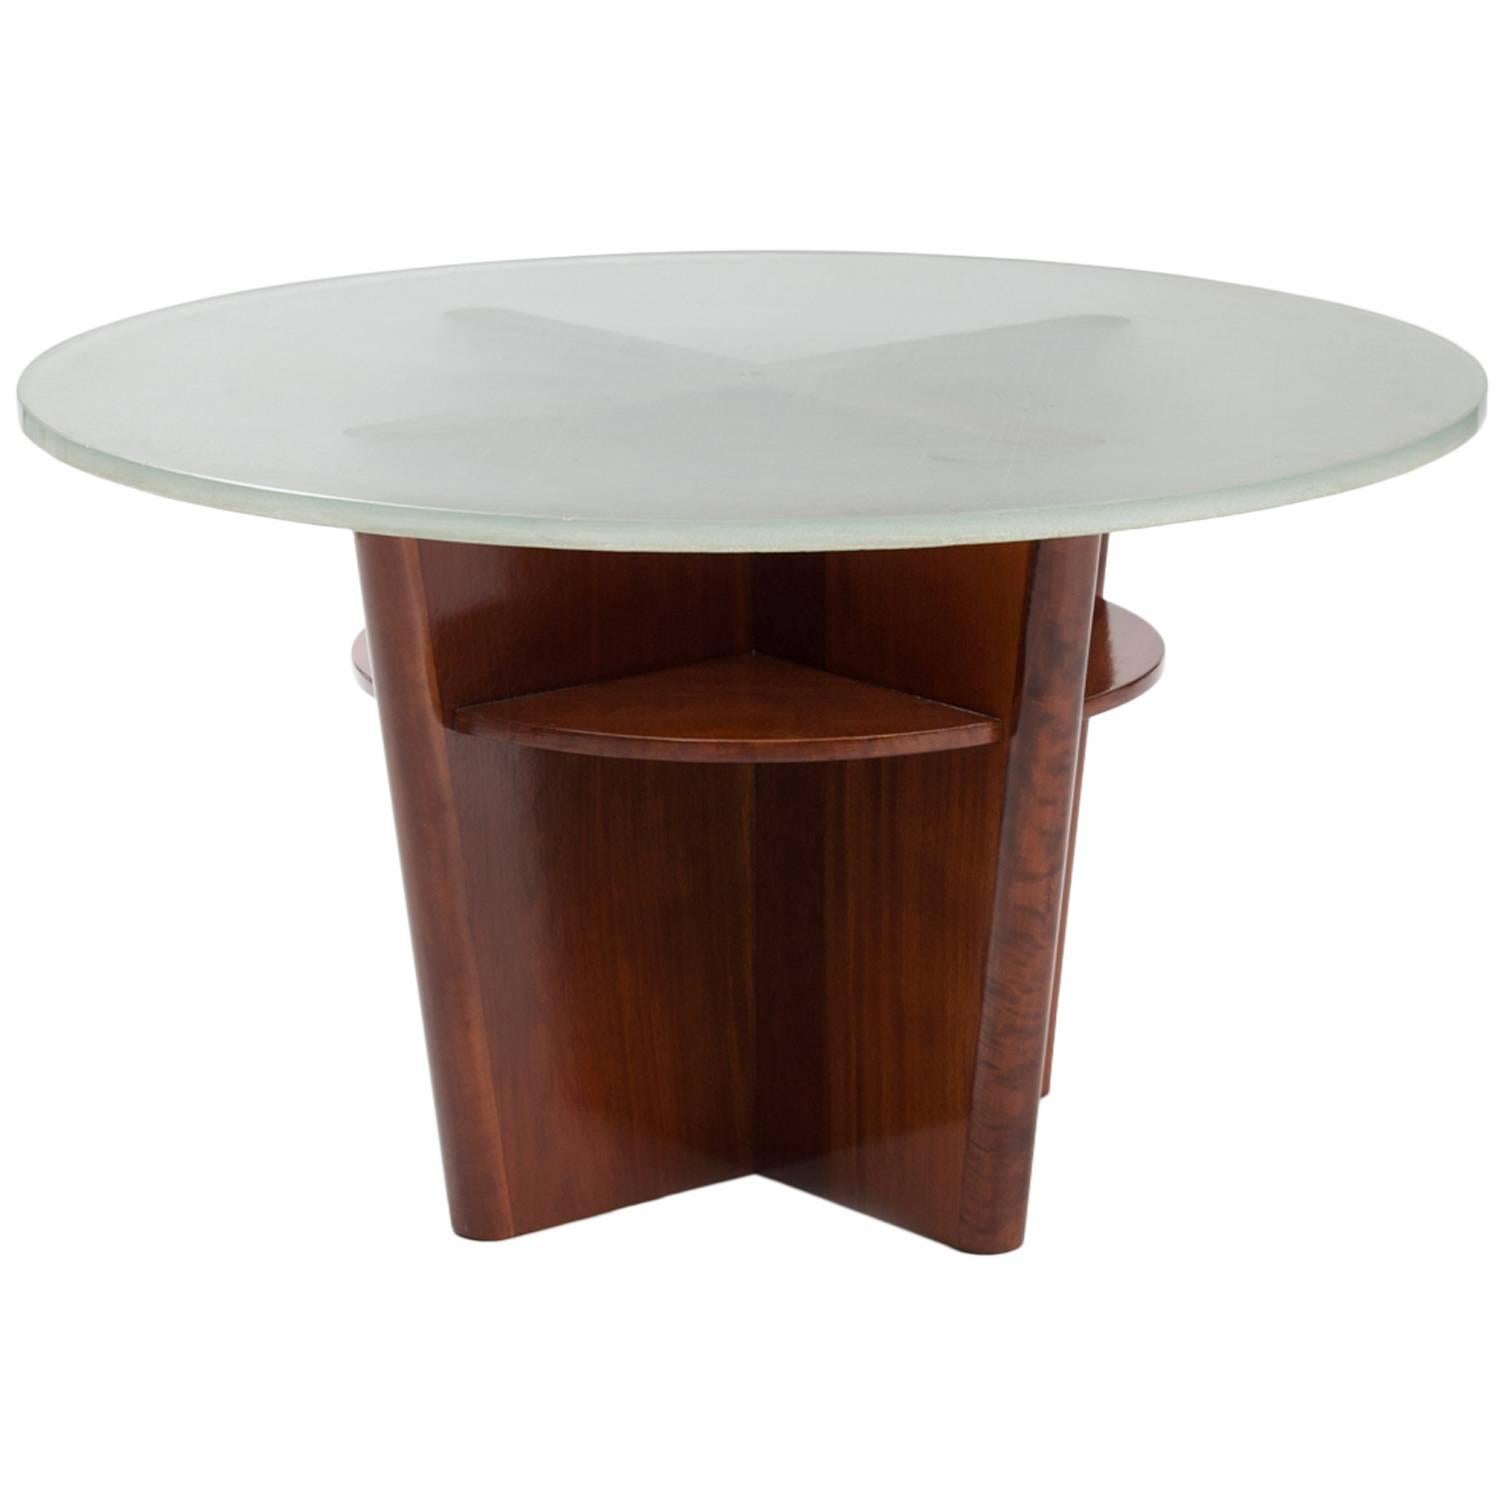 Greta Magnusson Grossman Modernist Coffee Table with Hand Cast Glass Top